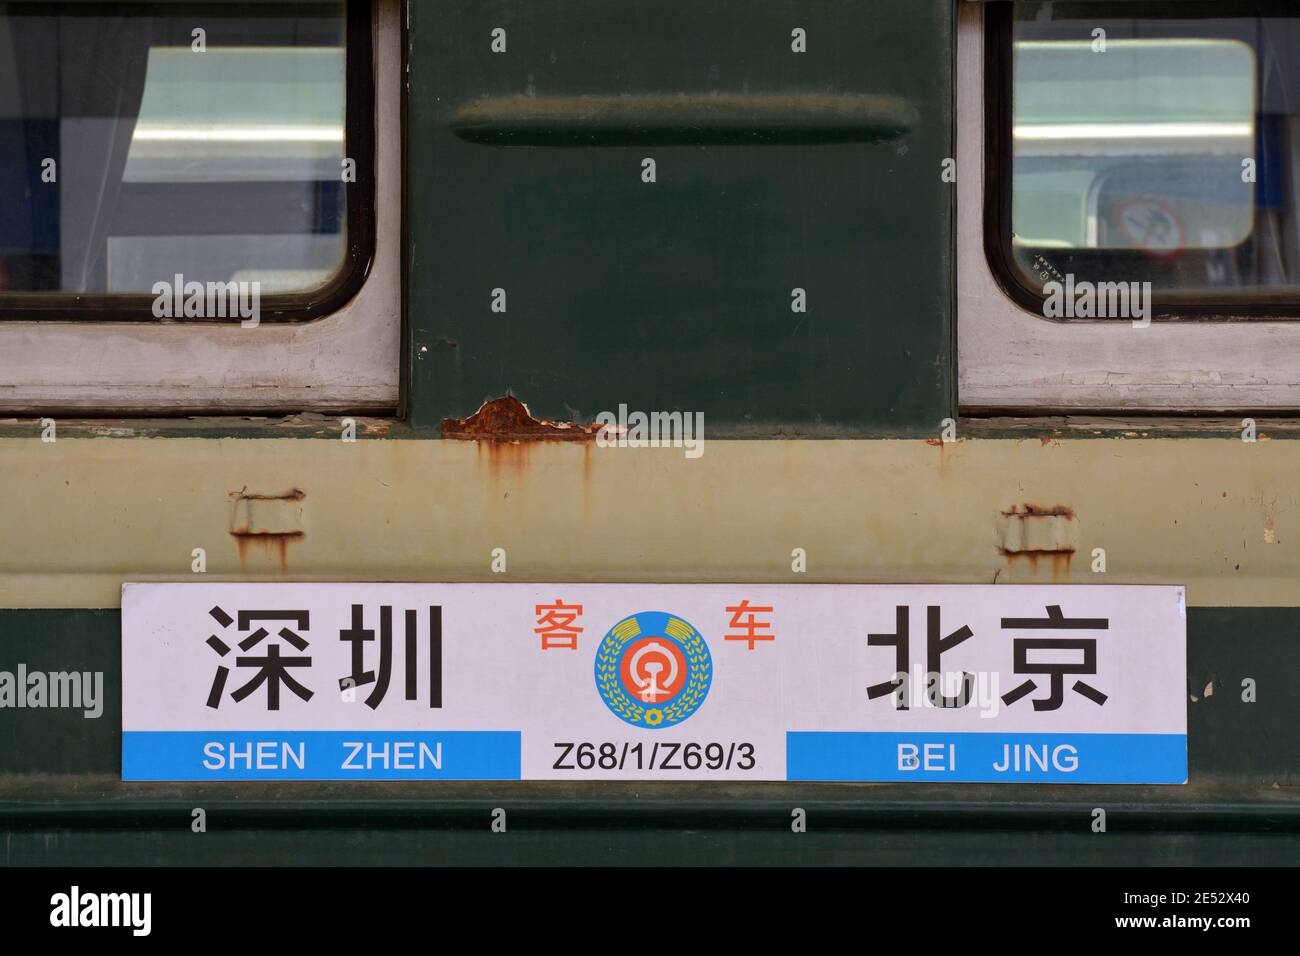 Old locomotive train and carriages in Shenzhen, China. Platform and station sign from the old Shenzhen to Beijing line. Stock Photo